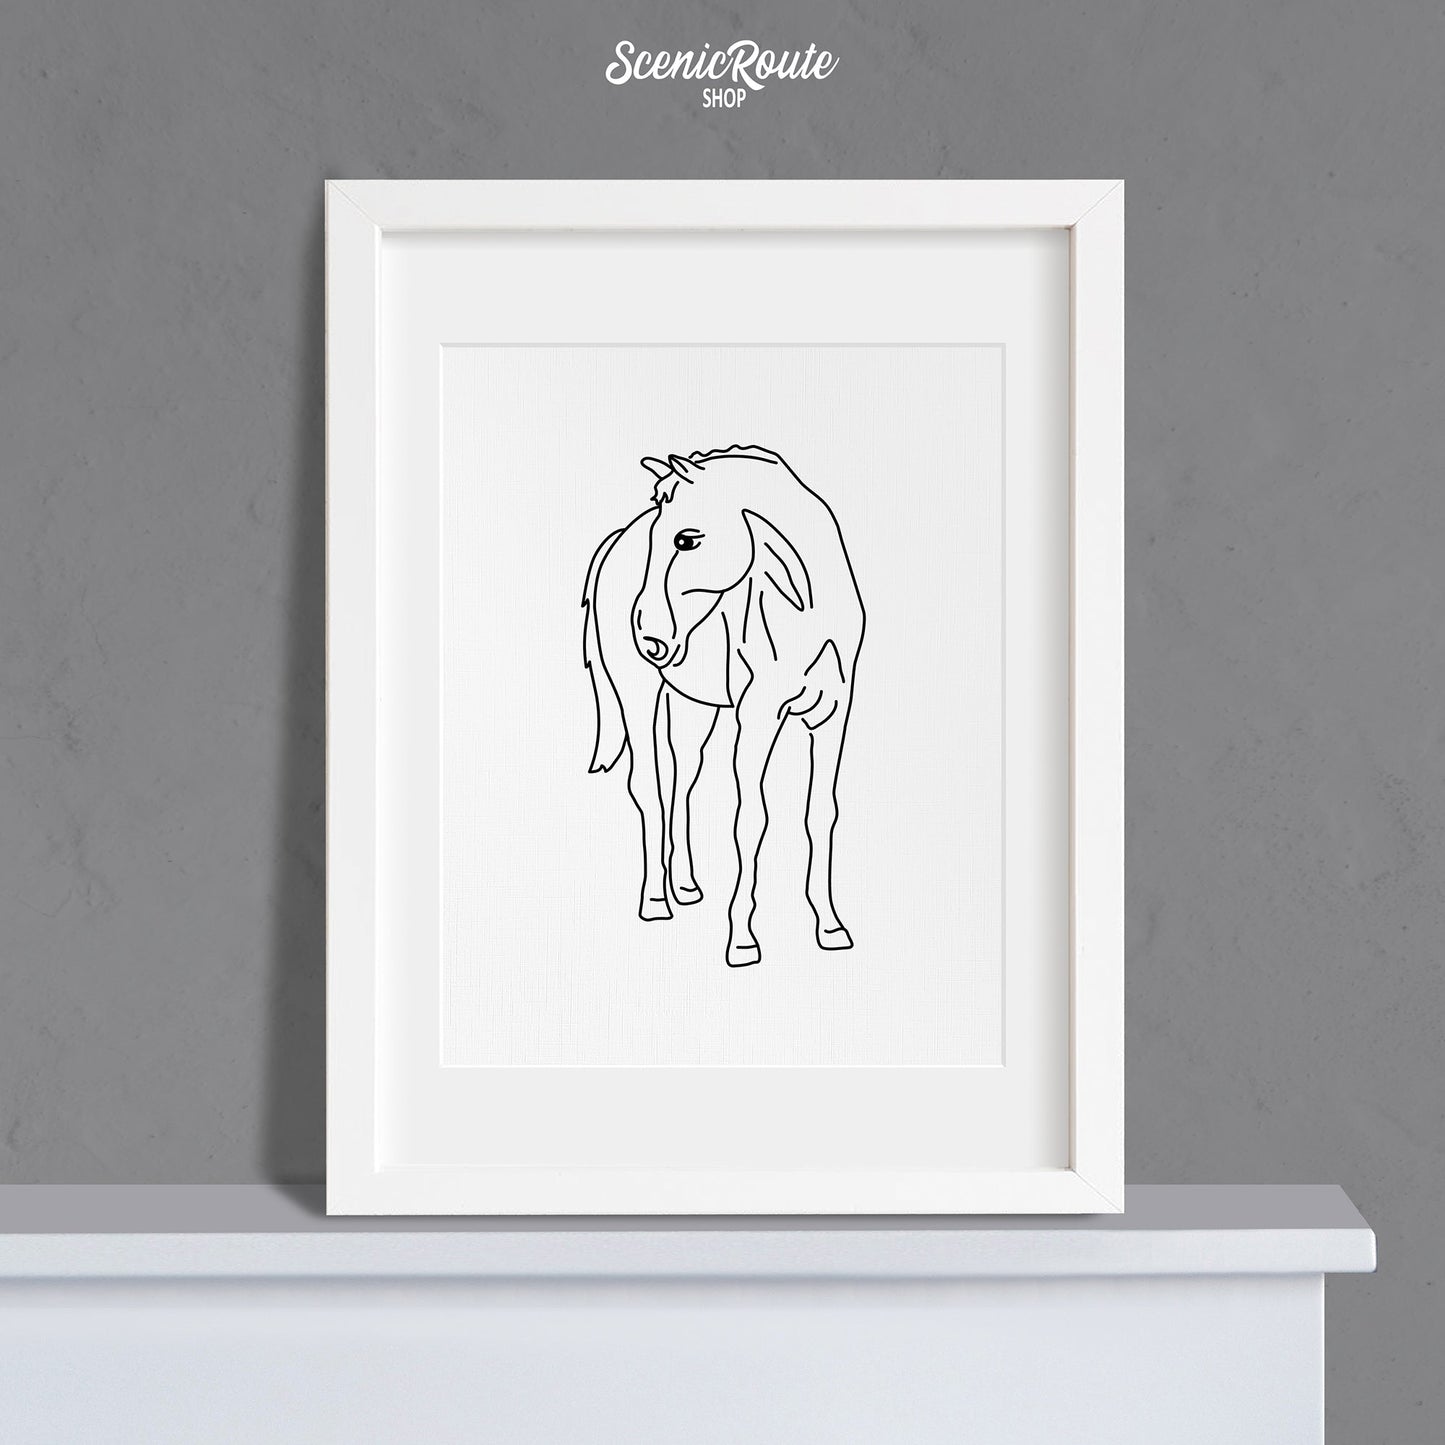 A framed line art drawing of a Horse on a mantle